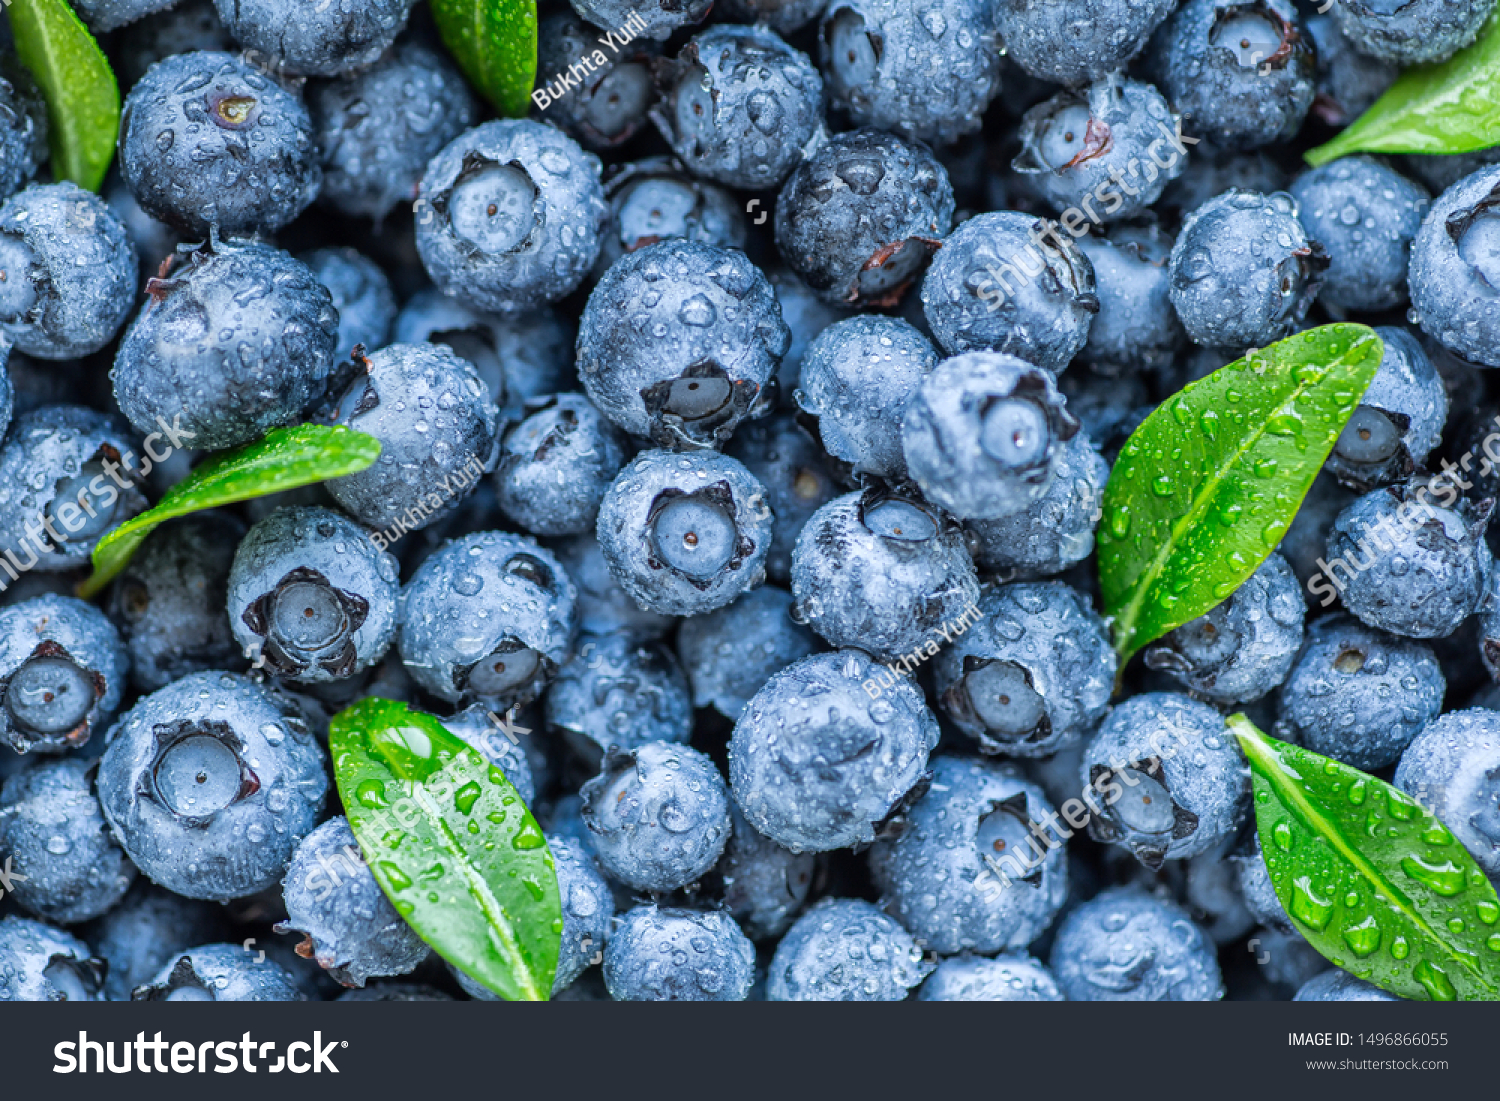 Water drops on ripe sweet blueberry. Fresh blueberries background with copy space for your text. Vegan and vegetarian concept. Macro texture of blueberry berries.Texture blueberry berries close up #1496866055